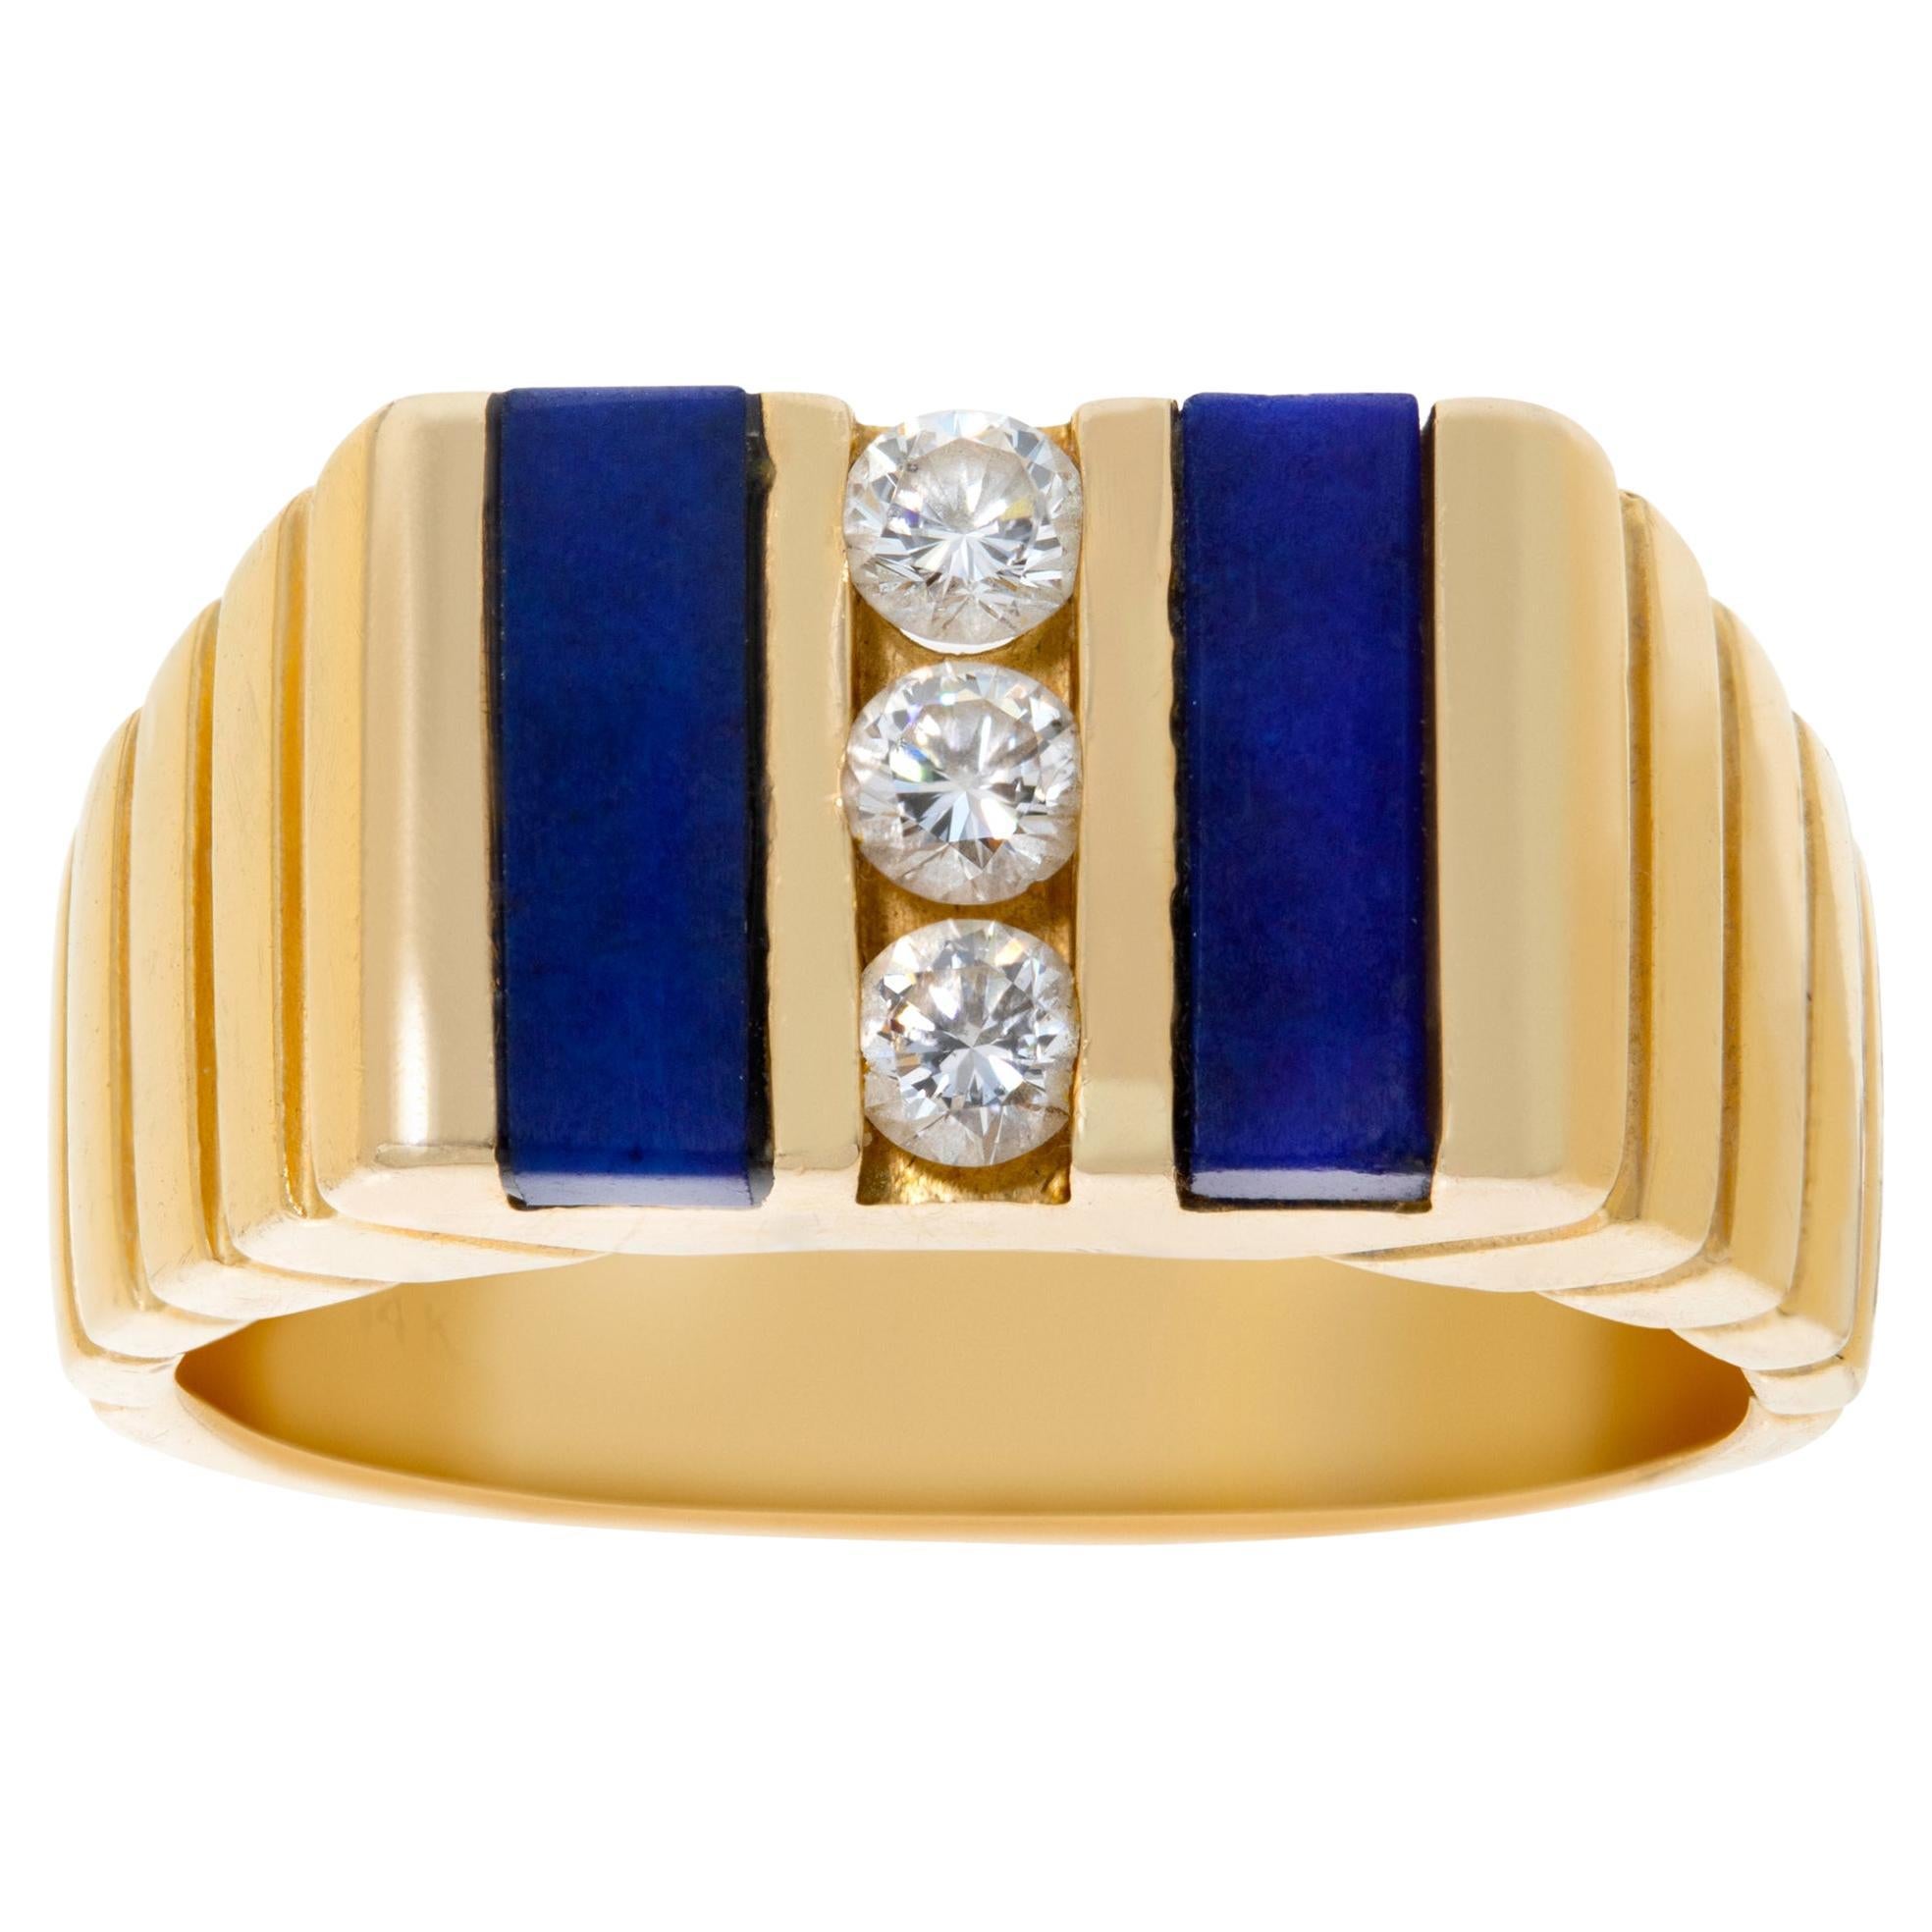 Ribbed yellow gold ring with 3 channel set diamonds & lapiz lazuli accents.